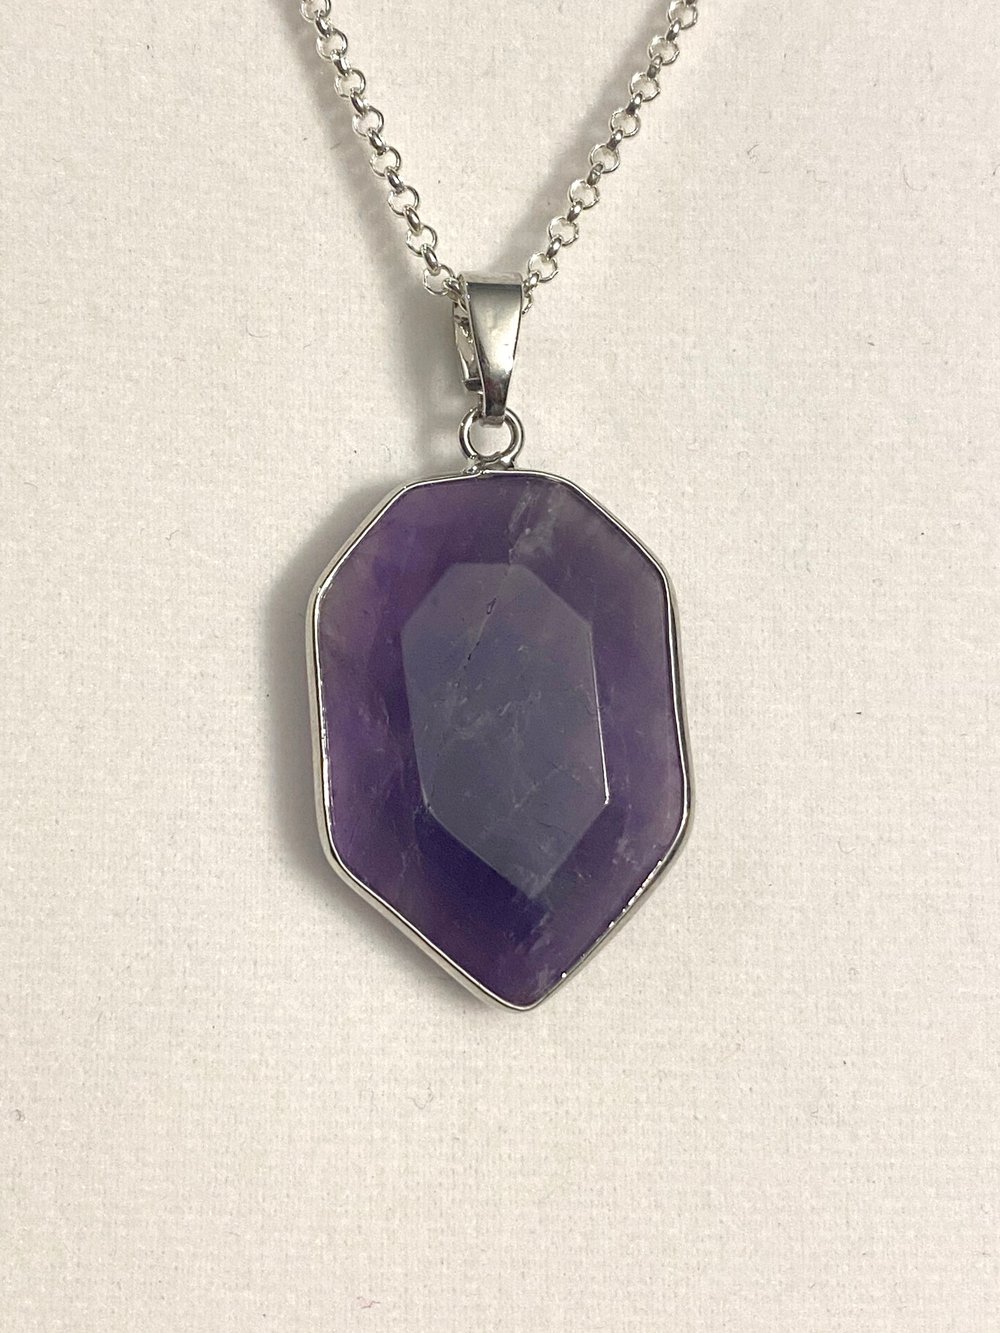 Amethyst Pendant and Silver Chain Necklace